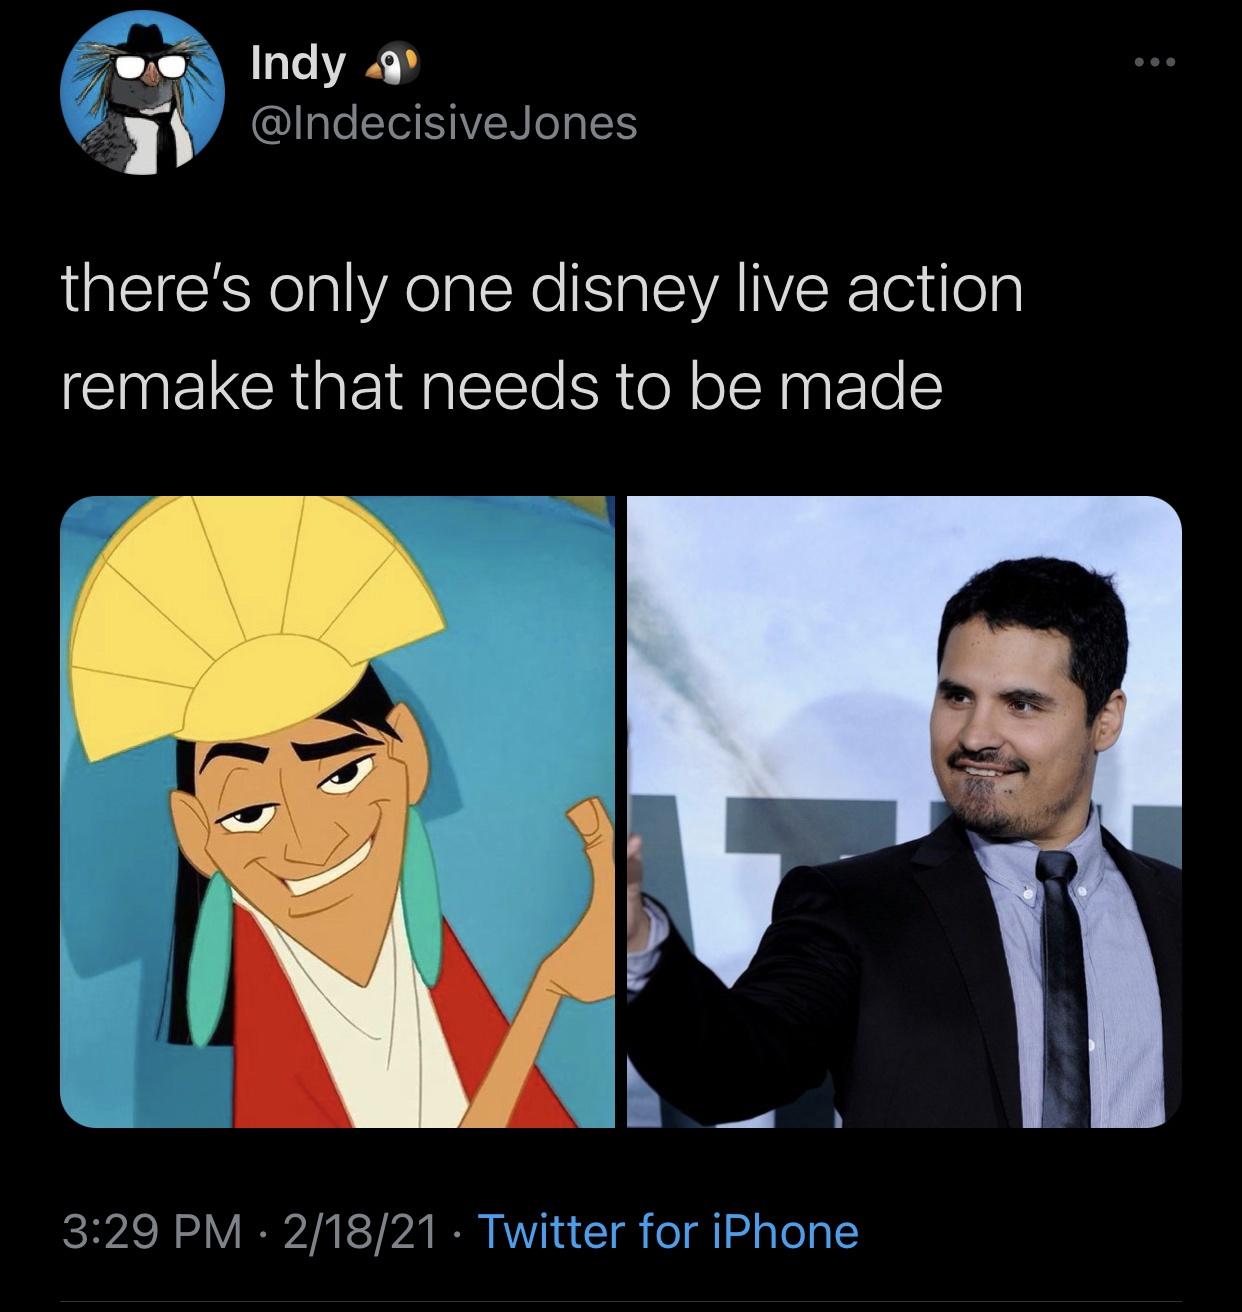 cartoon - Indy ng! Jones there's only one disney live action remake that needs to be made 21821 Twitter for iPhone